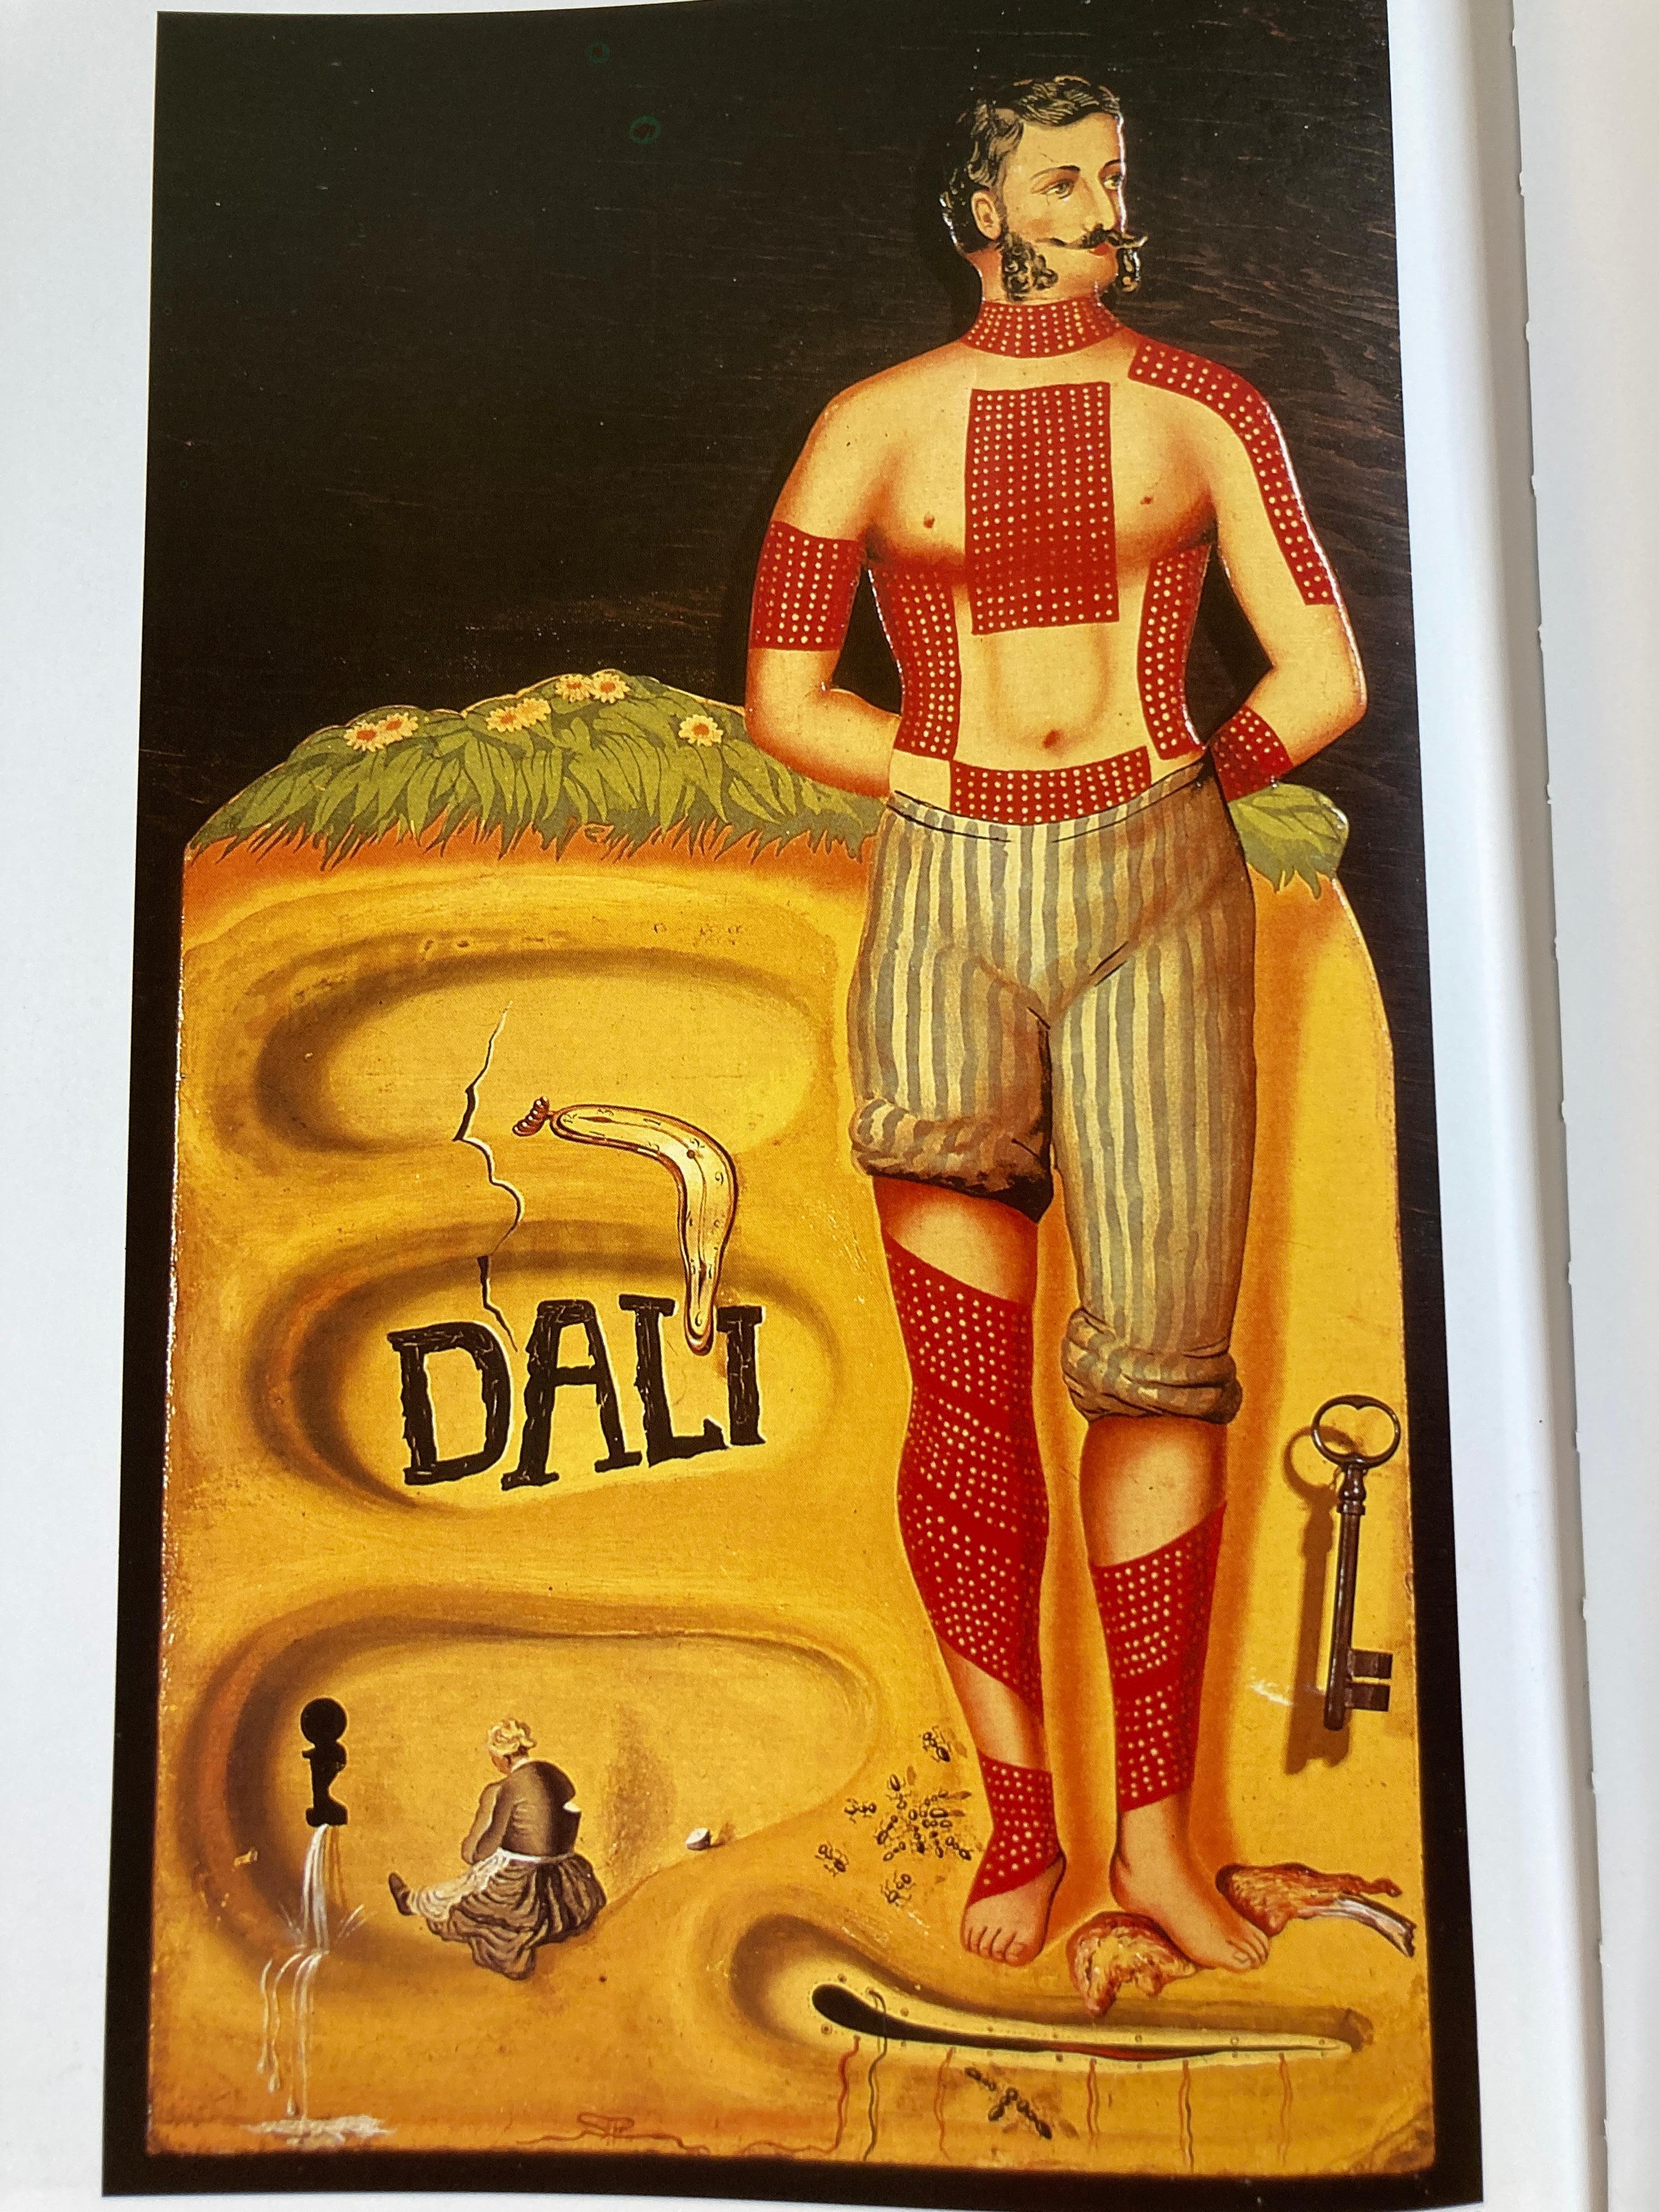 Paper Dali The Work and the Man by Robert Descharnes Hardcover Coffee Table Art Book For Sale